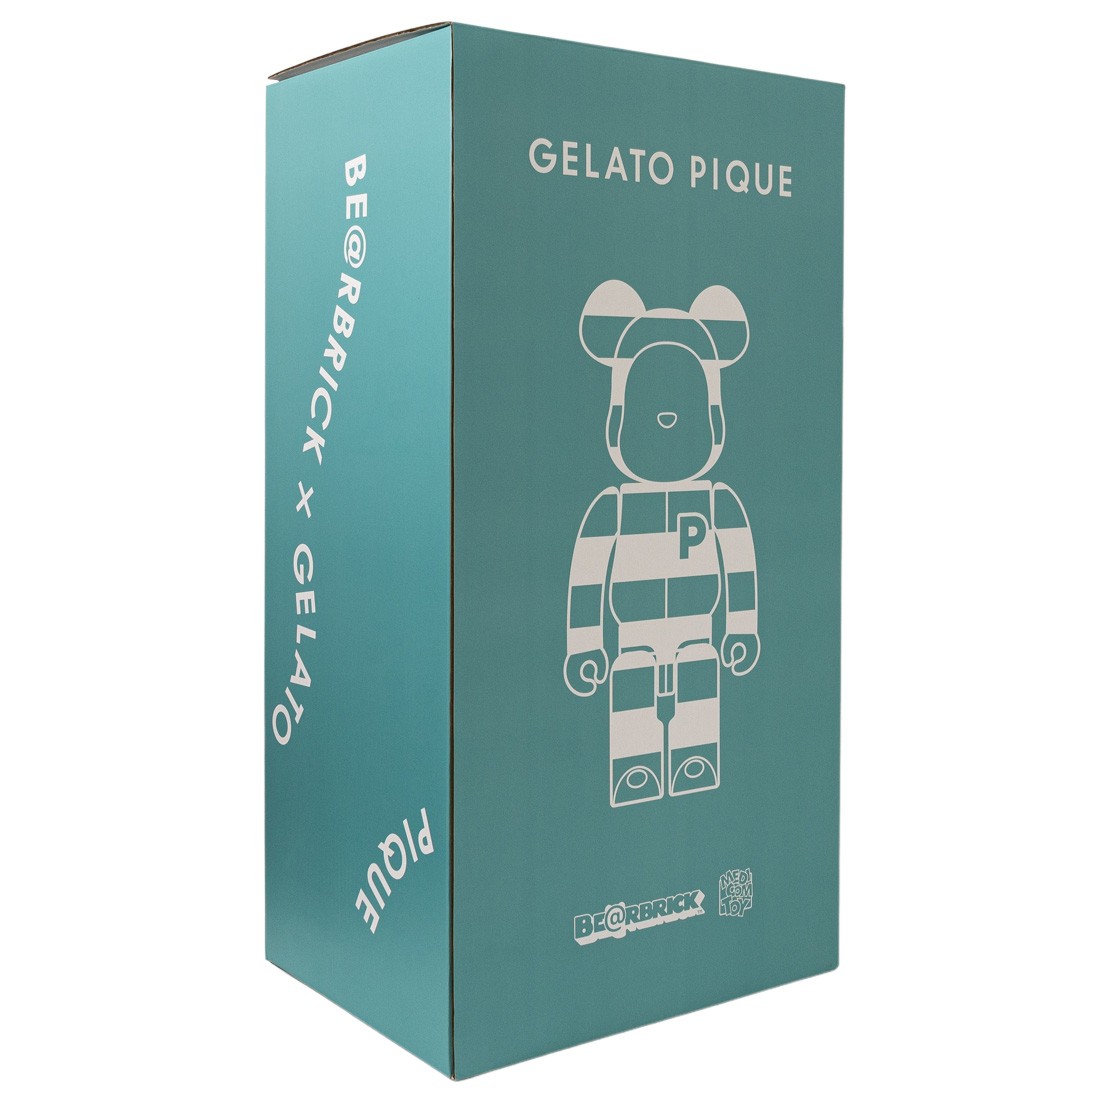 Gelato Pique x Be@rbrick Mint White 400% Collectible Figure by